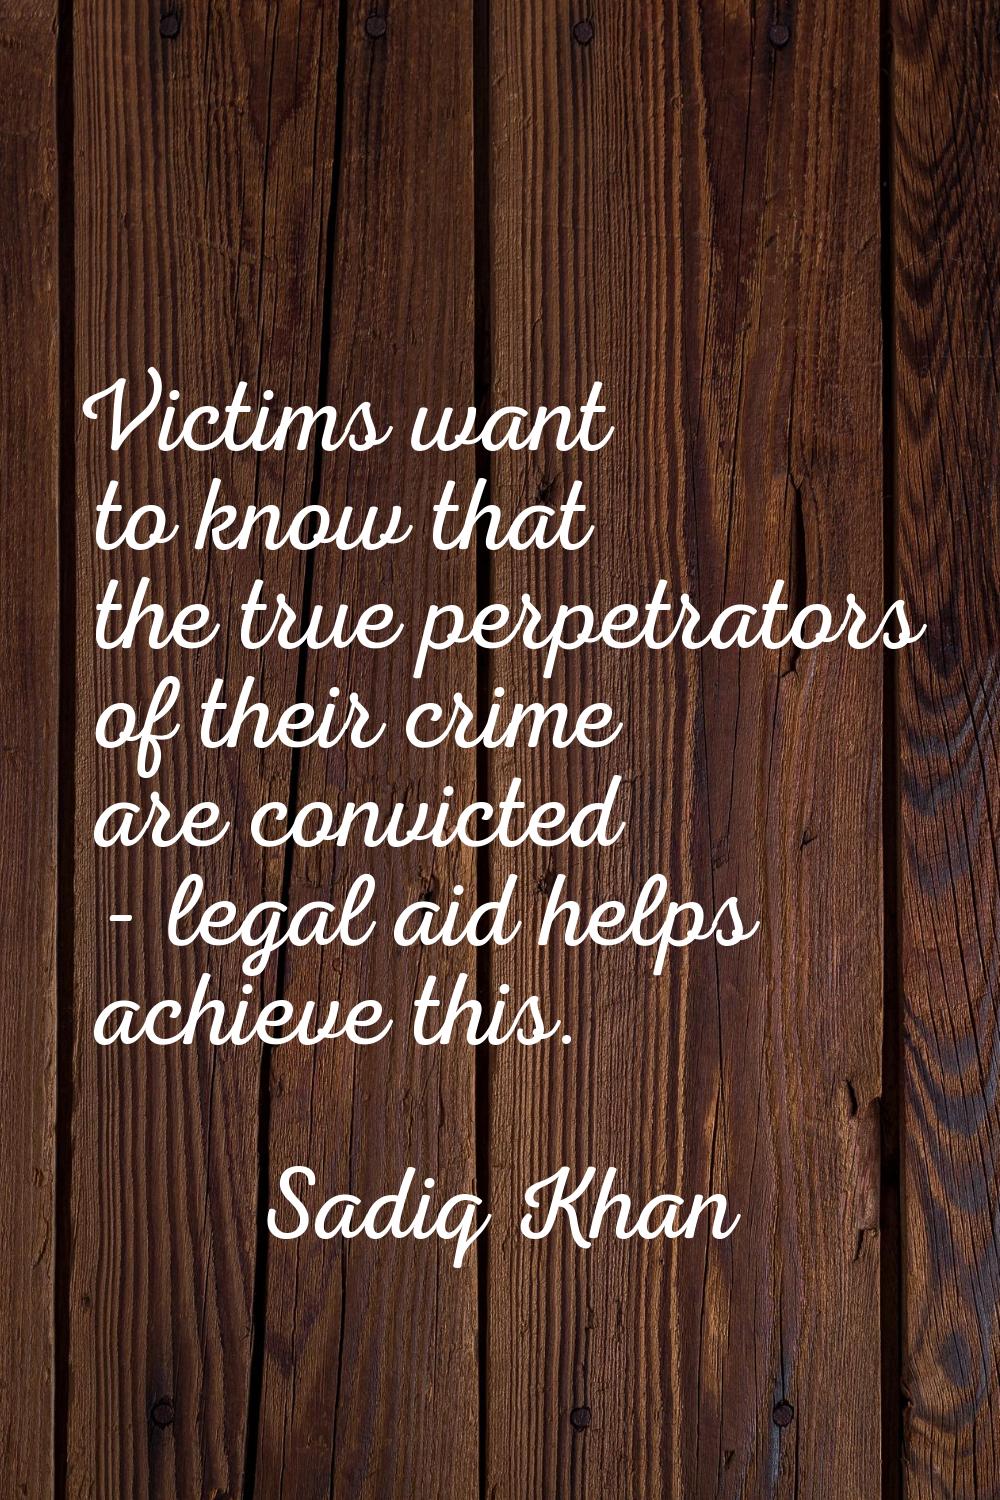 Victims want to know that the true perpetrators of their crime are convicted - legal aid helps achi